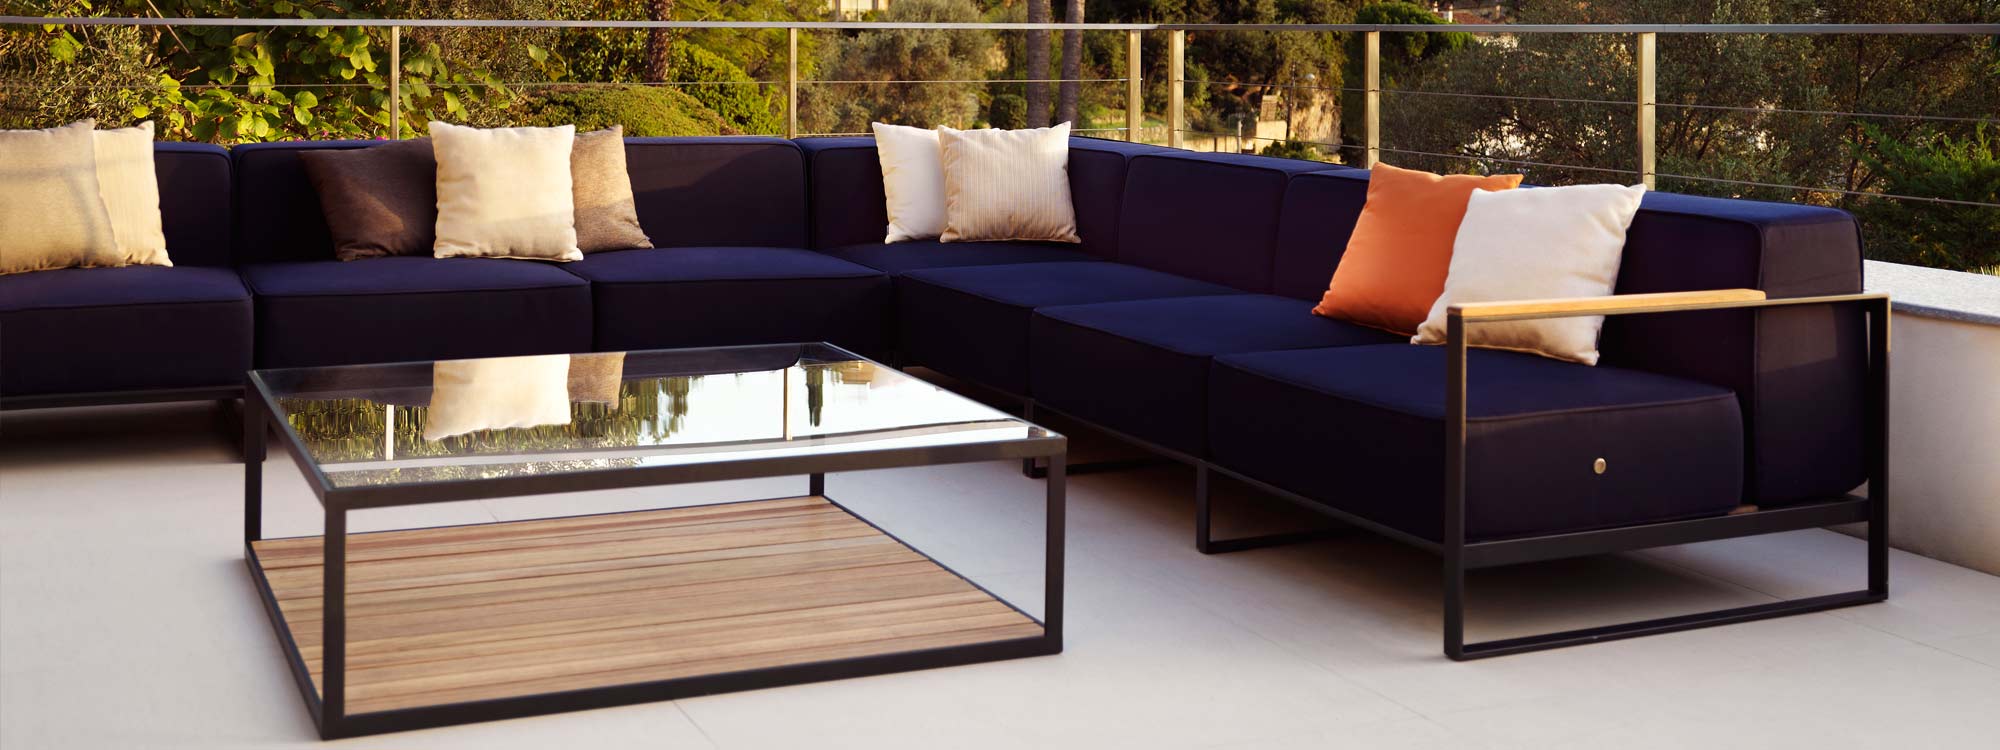 Image of Moore large garden corner sofa with anthracite coloured stainless steel frame and Navy Blue coloured Sunbrella fabric cushions